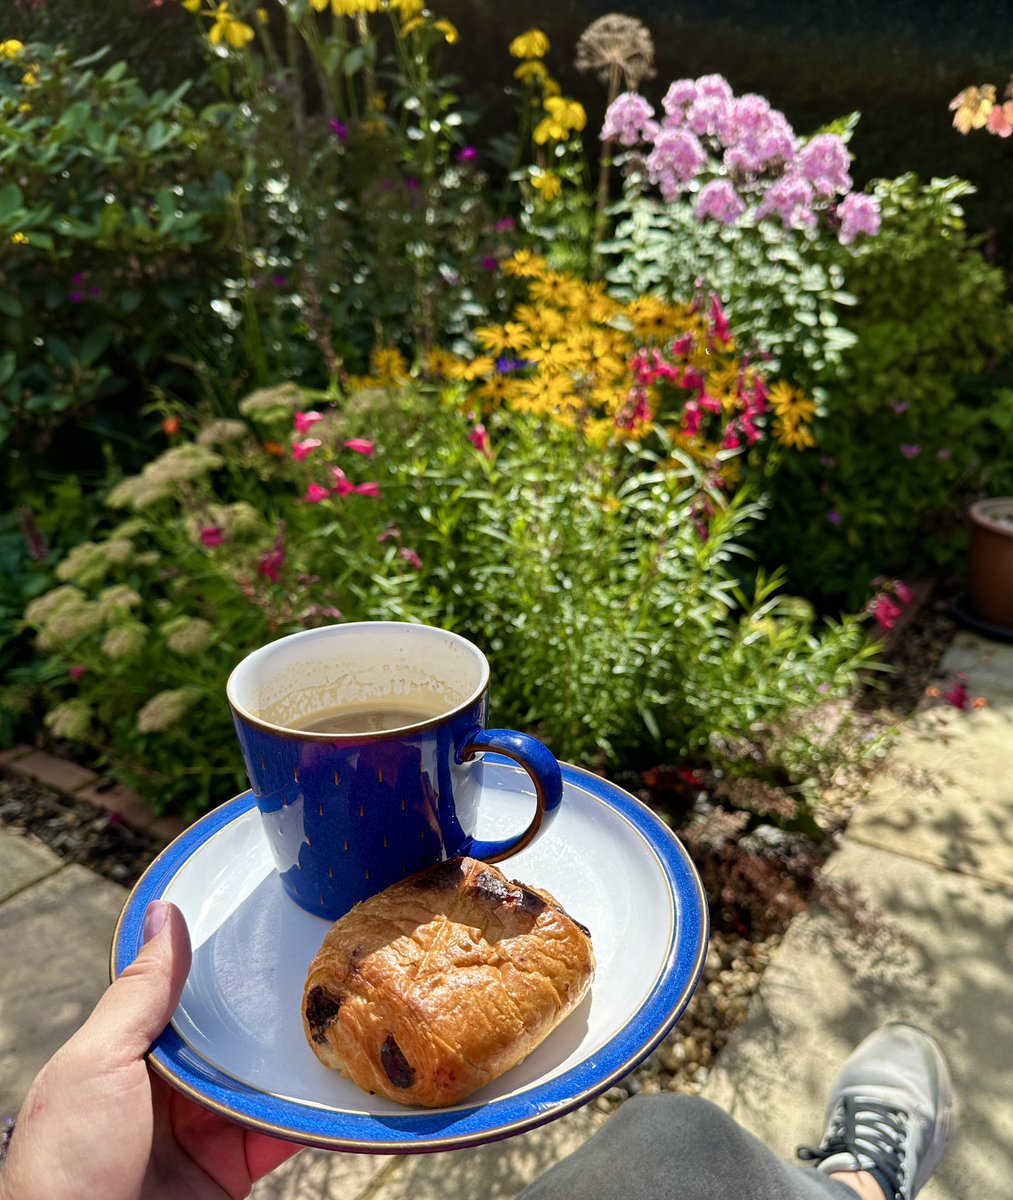 Good morning, flower lovers 🌿💛🌸🩷
Rare treat of Pain au chocolat & coffee in the garden 🥐🍫☕️
What could be better 🌿
Feeling lucky & grateful 😊

#EveryDaysAGoodDay #BreakfastInTheGarden
#mygarden #GardeningTherapy #flowers #FlowersOnFriday